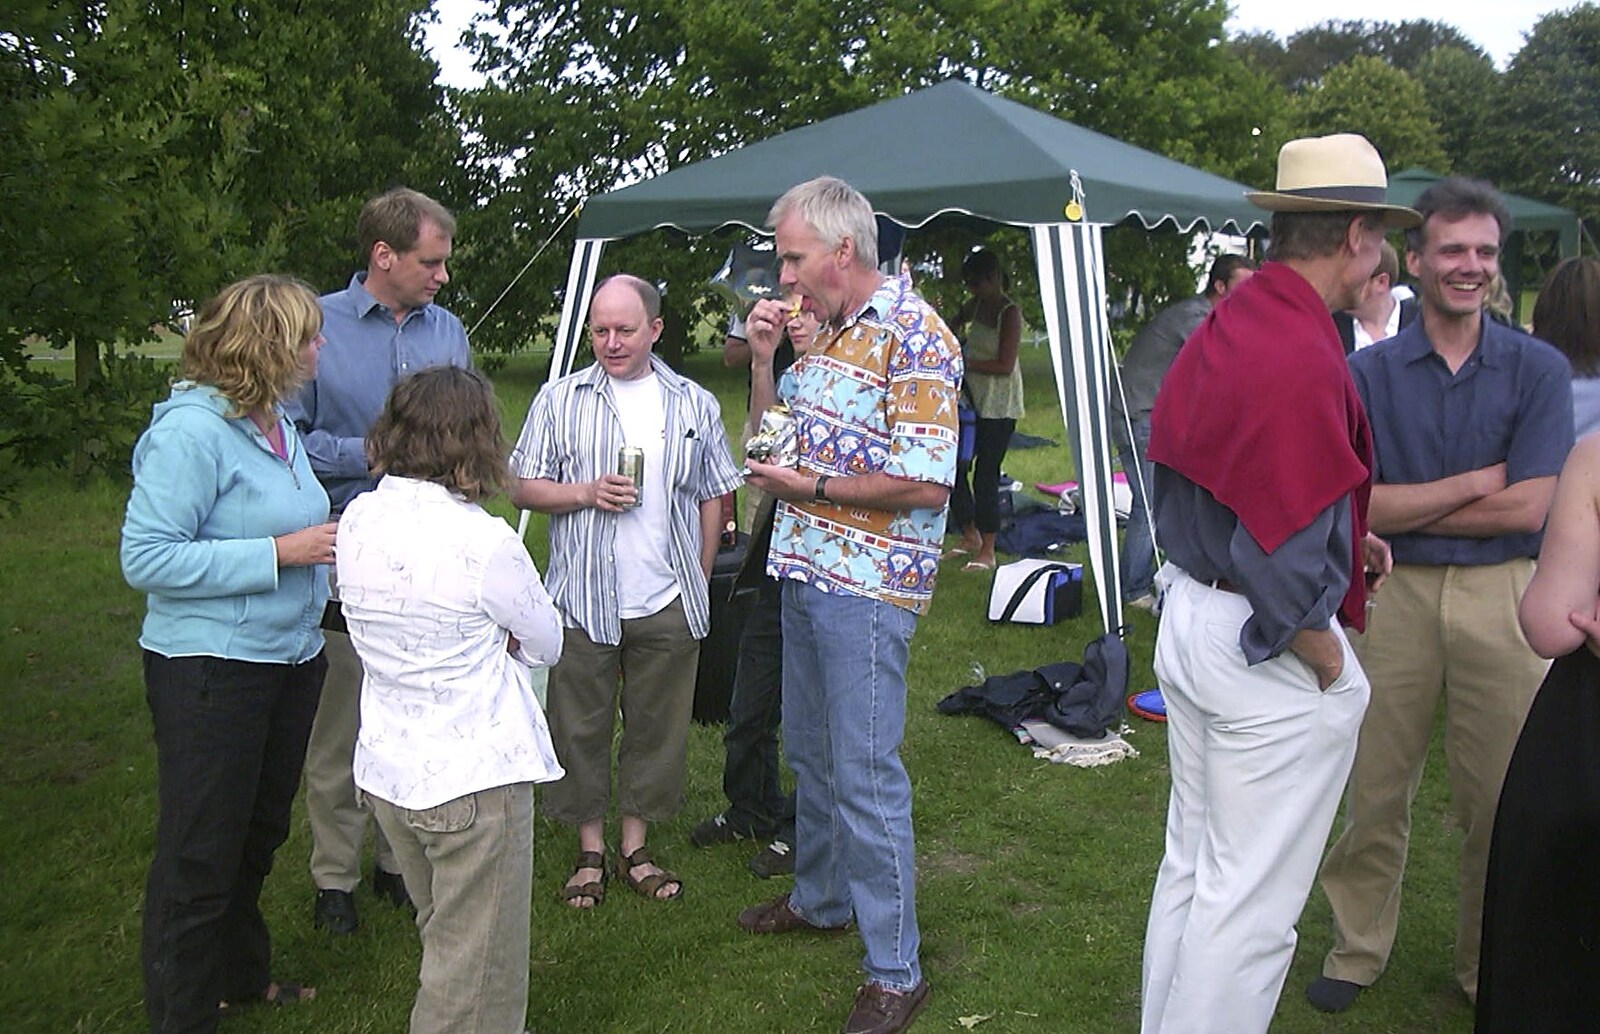 3G Lab at Jools Holland, Audley End, Saffron Walden, Essex - 25th July 2004: Andrew has a particularly loud shirt on